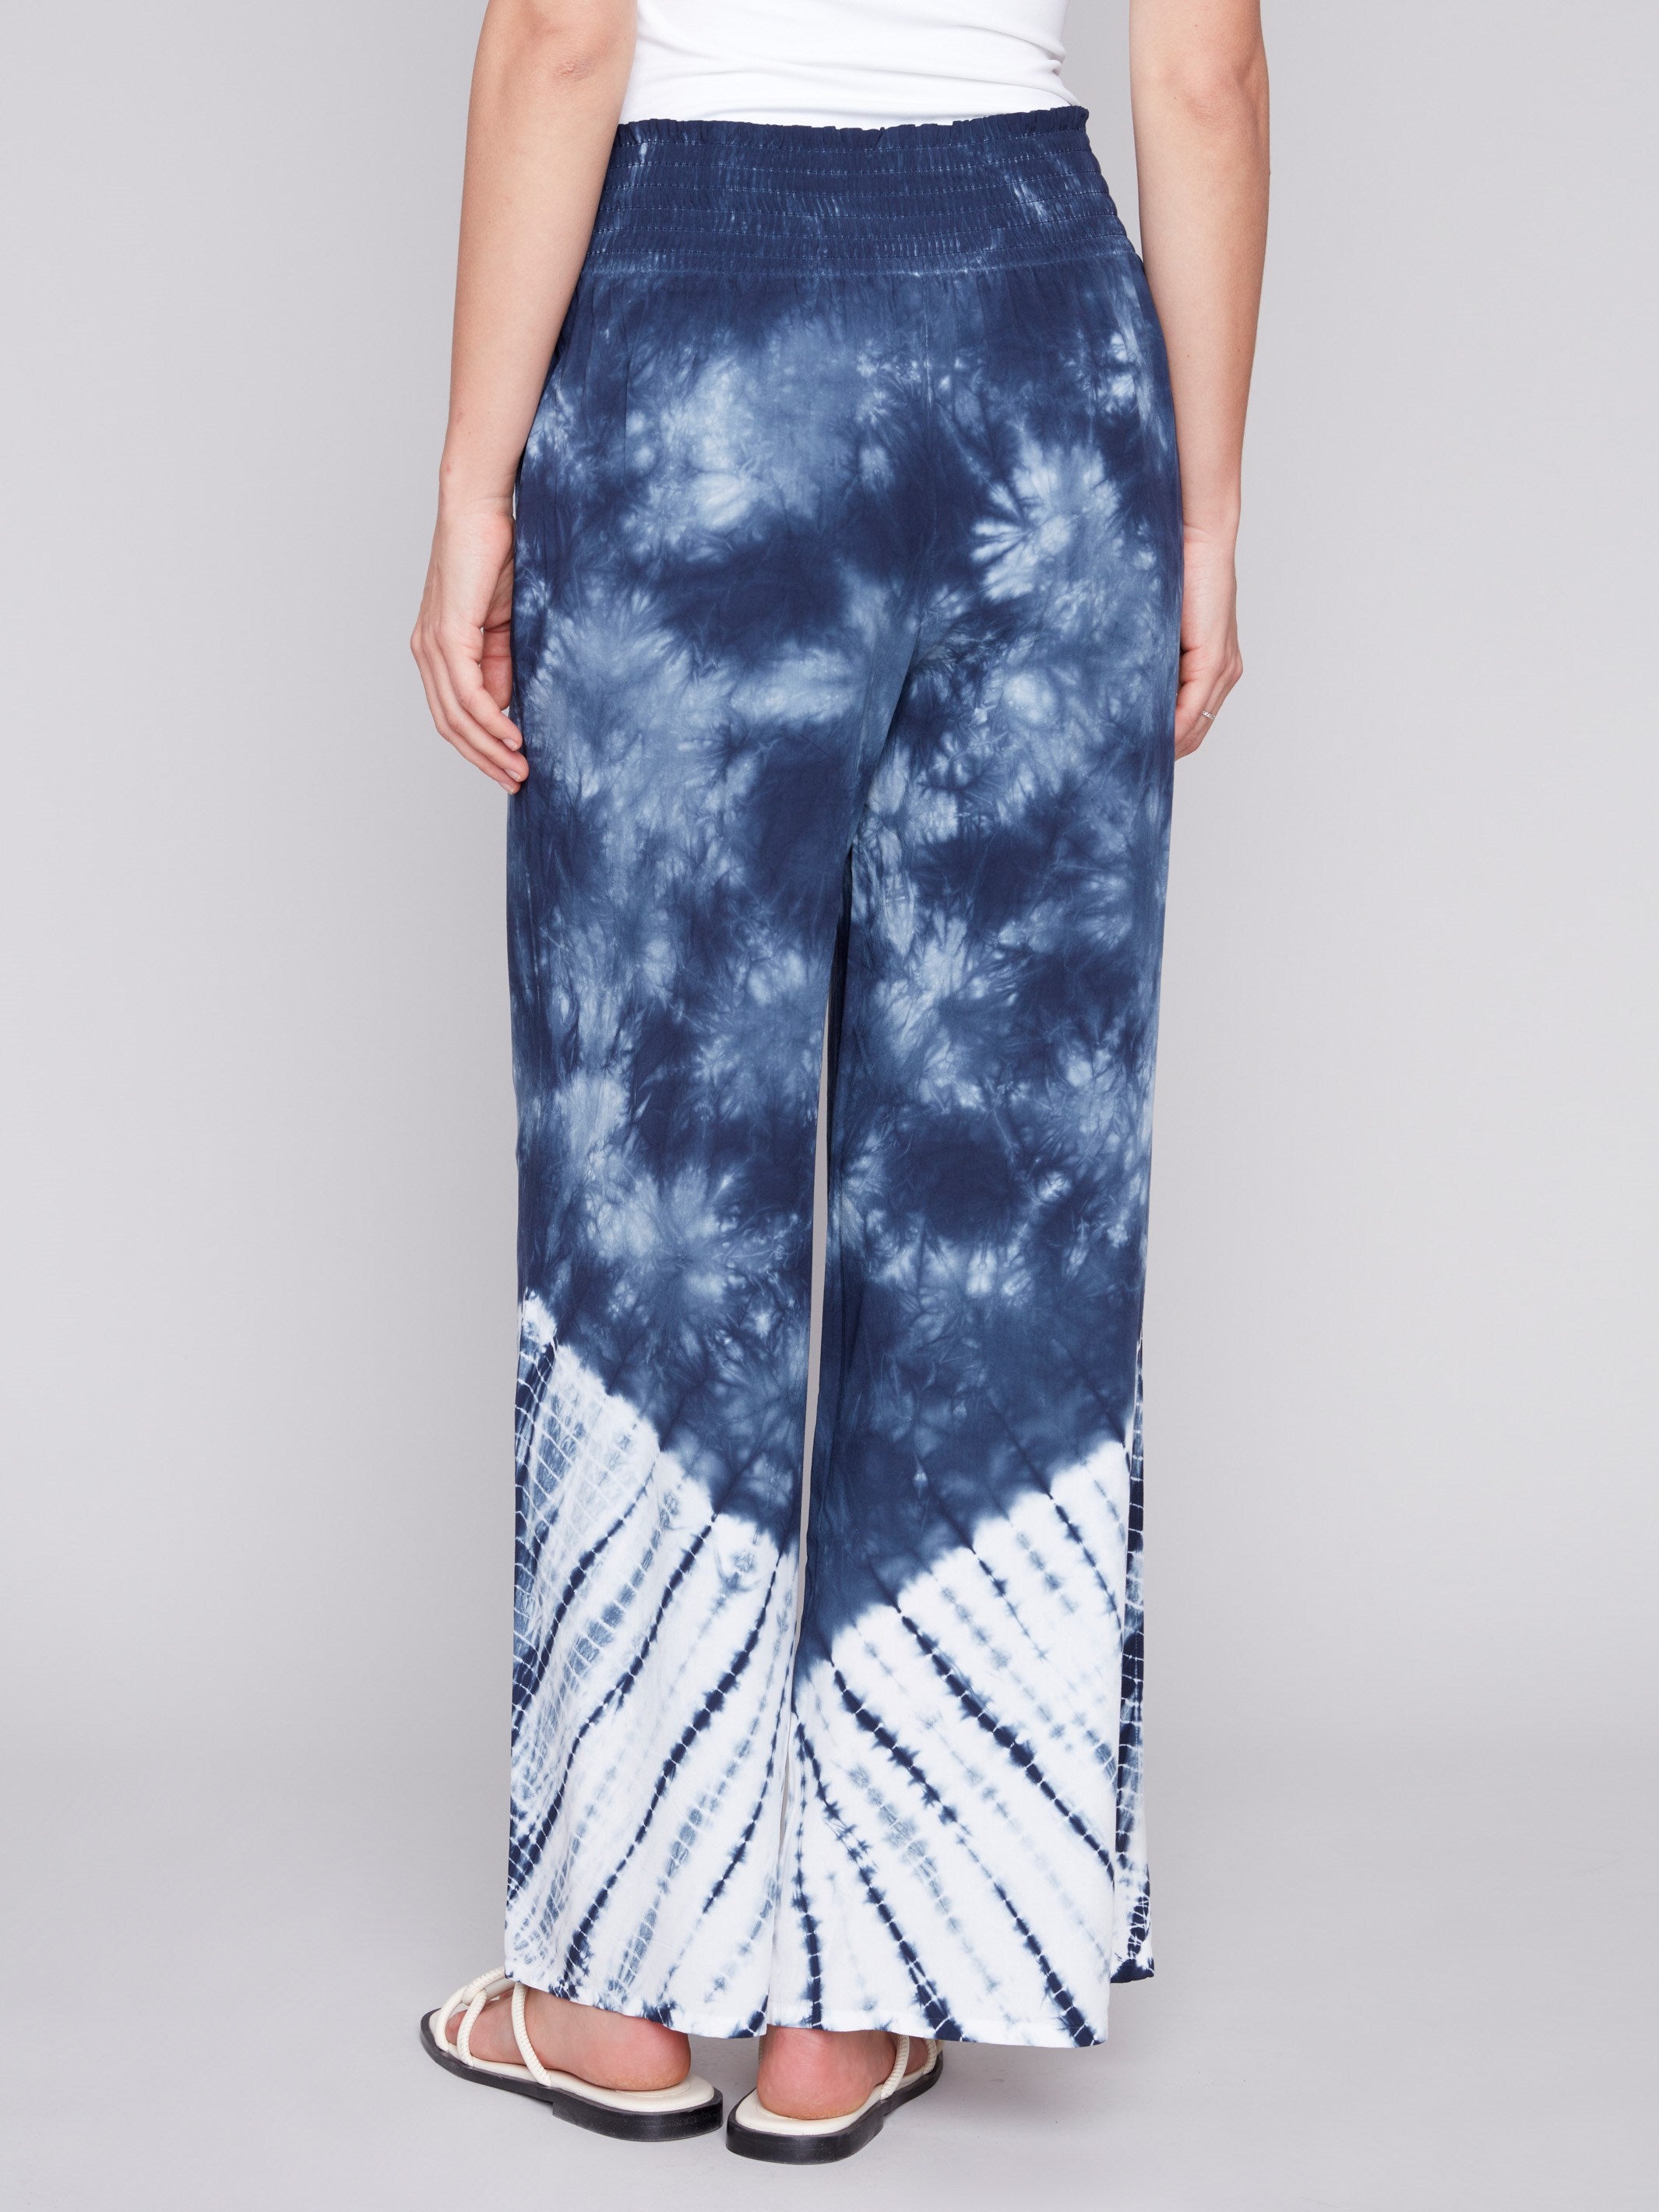 Printed Flowy Palazzo Pants - Navy - Charlie B Collection Canada - Image 3